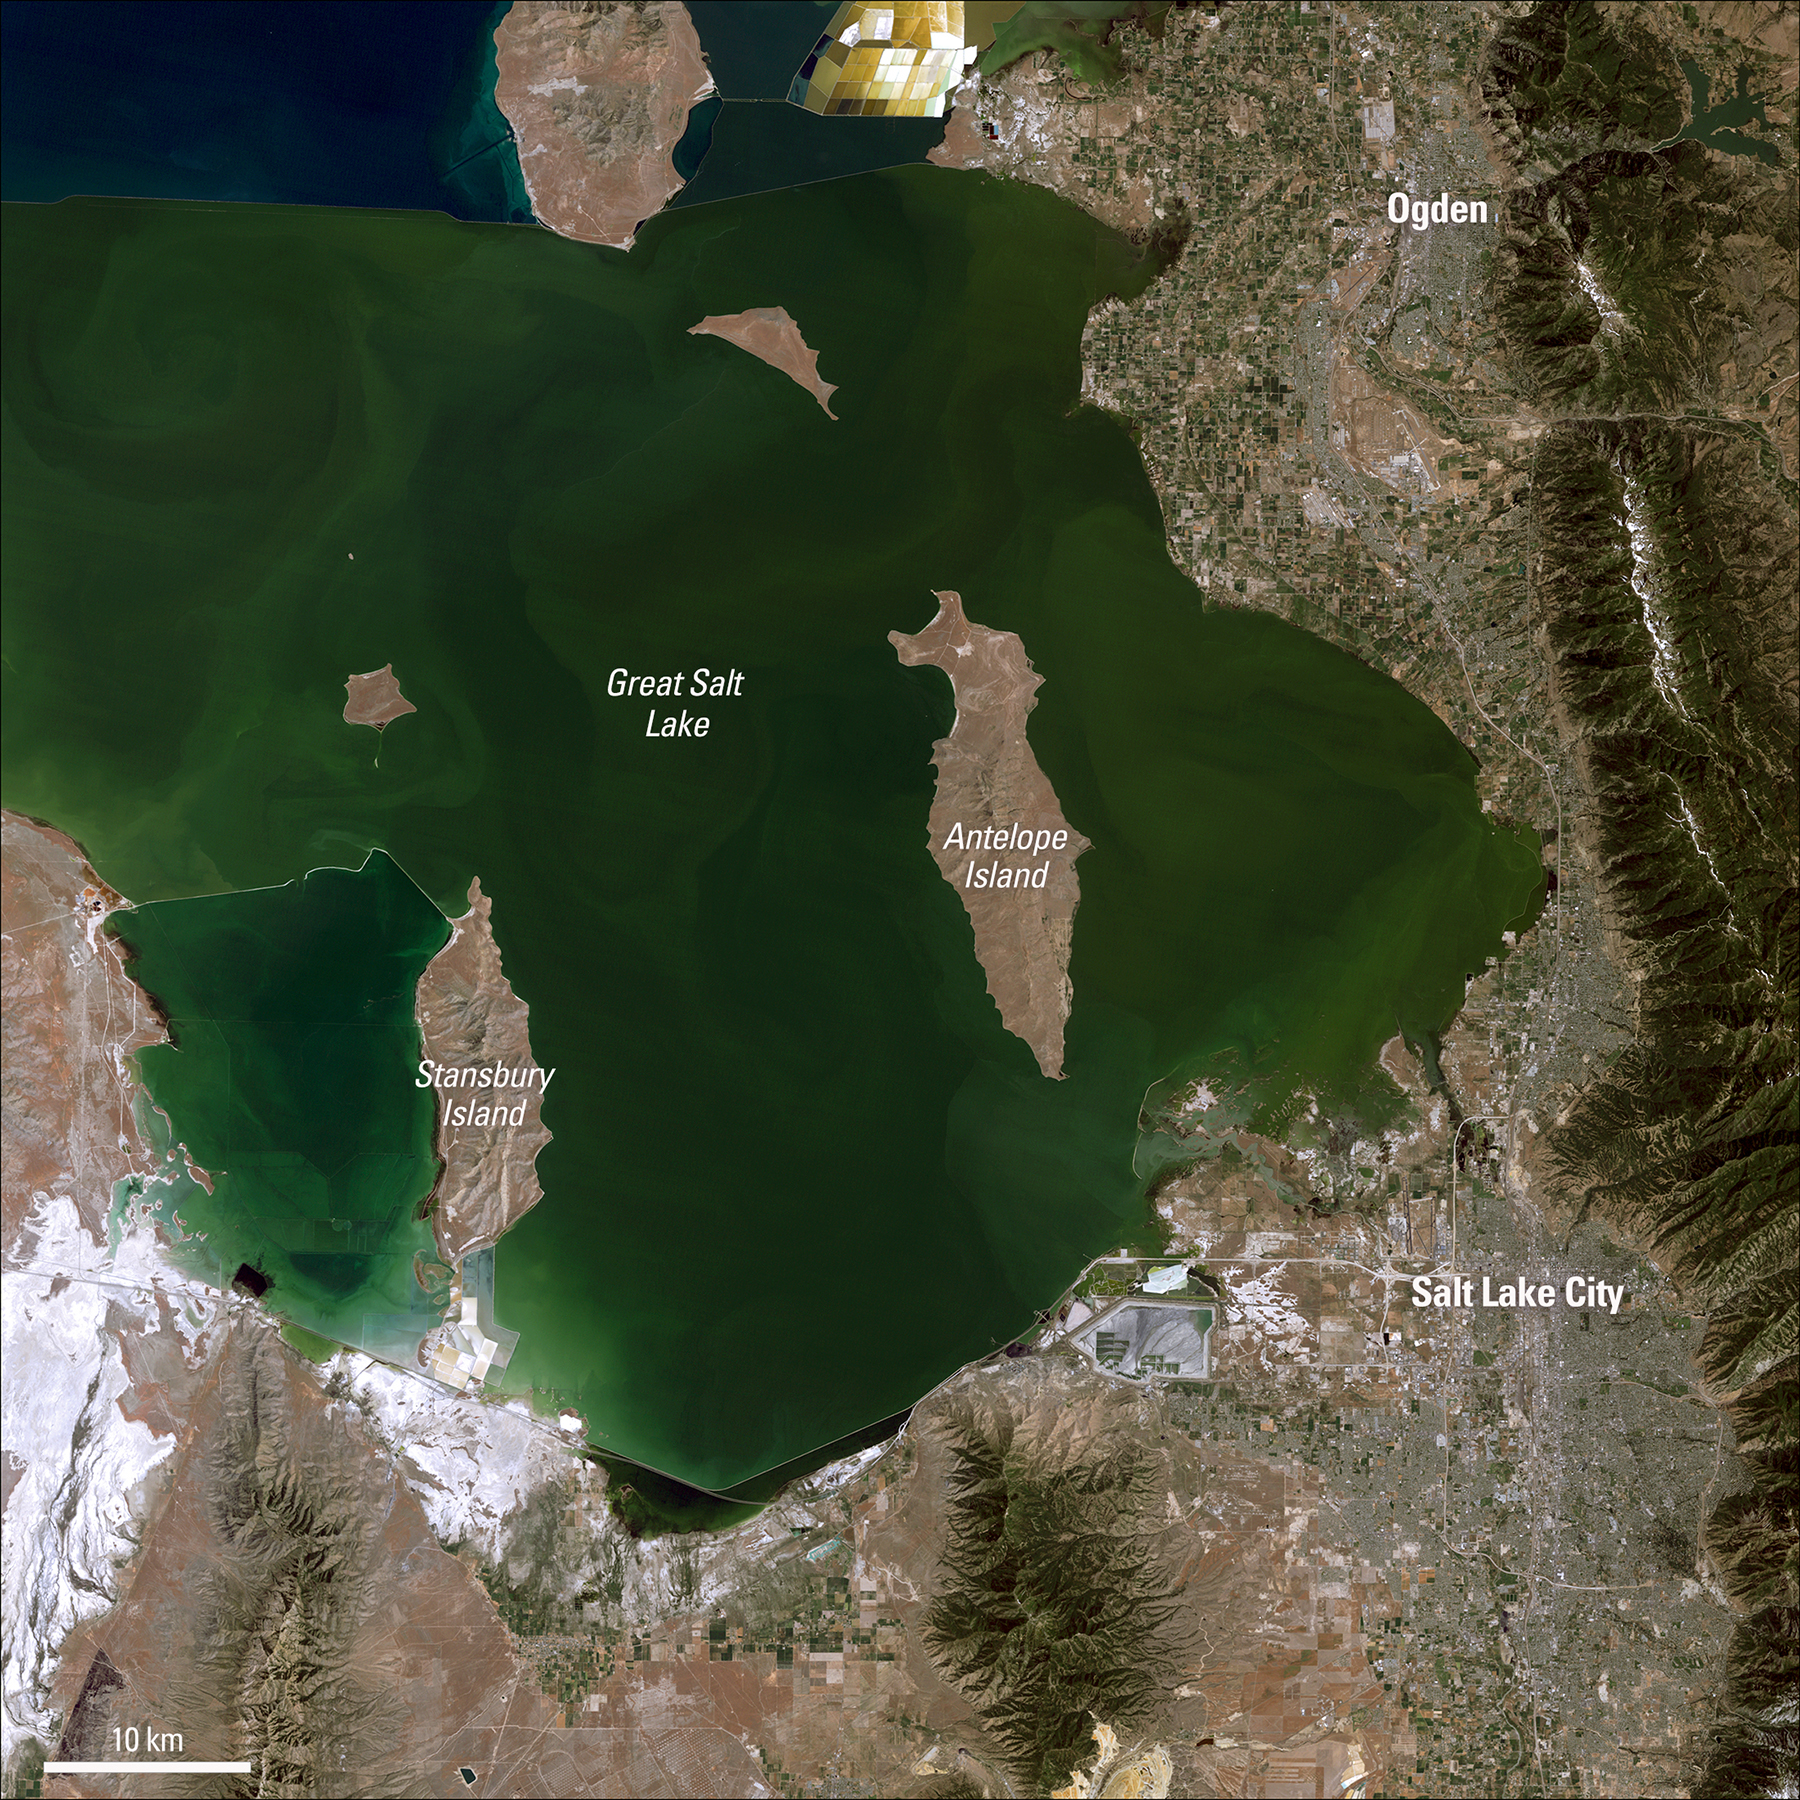 In 1986, the Great Salt Lake was at a record-high elevation, covering approximately 2,300 sq mi and containing roughly 30 million acre-ft of water. (Image courtesy of Michelle Bouchard using Landsat data from the U.S. Geological Survey)